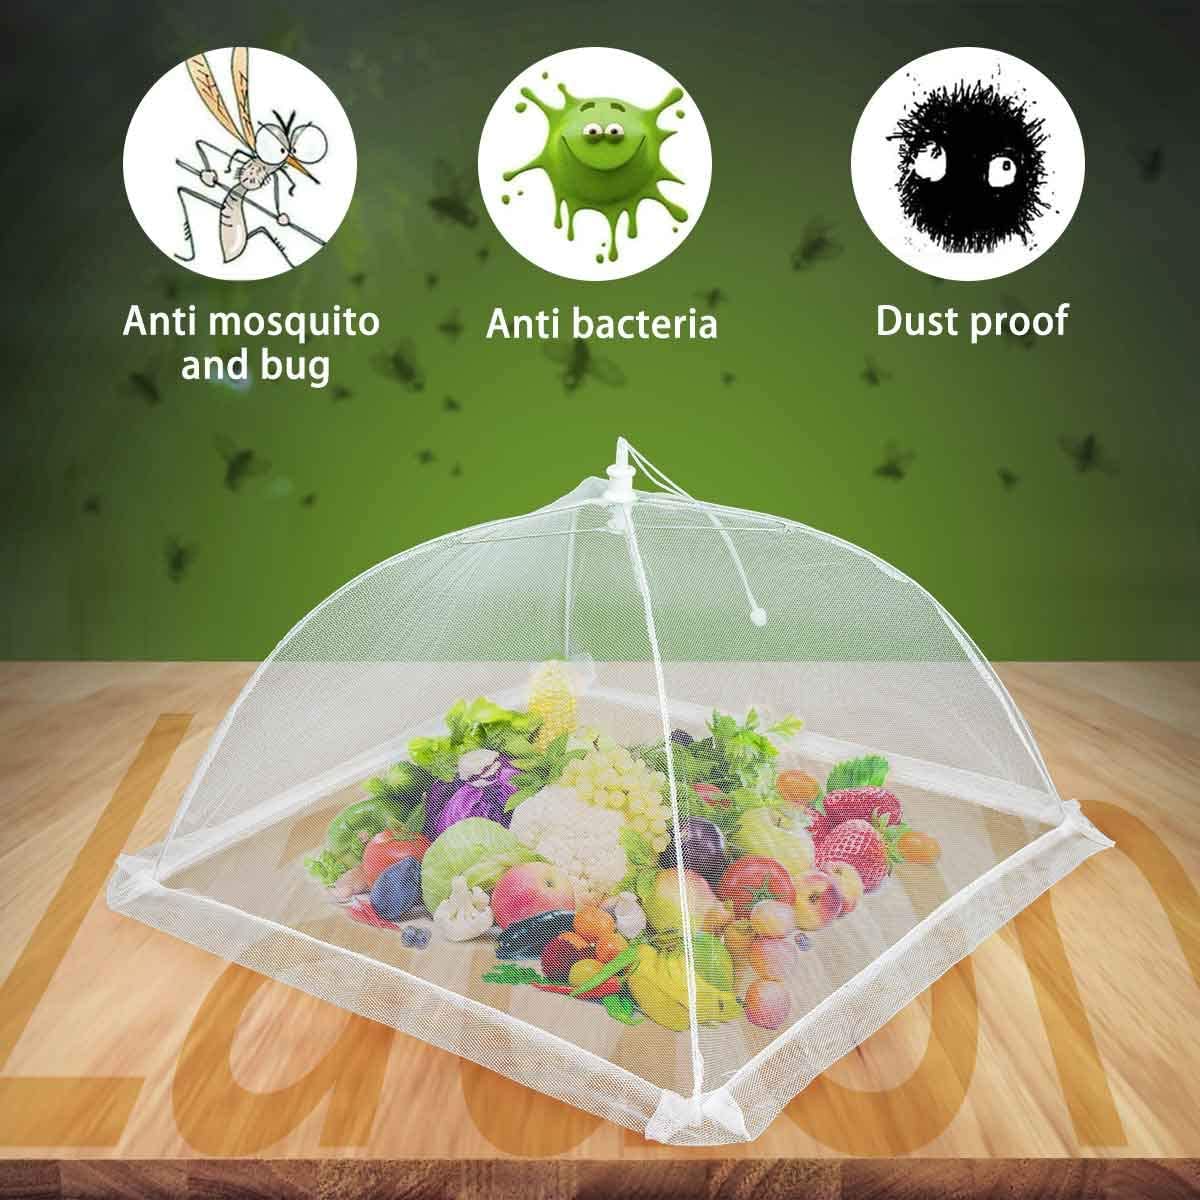 Food Cover Mesh Food Tent-5 Pack, White Nylon Covers for Outdoor Camping, Picnics, Parties, BBQ, Collapsible and Reusable. - e4cents